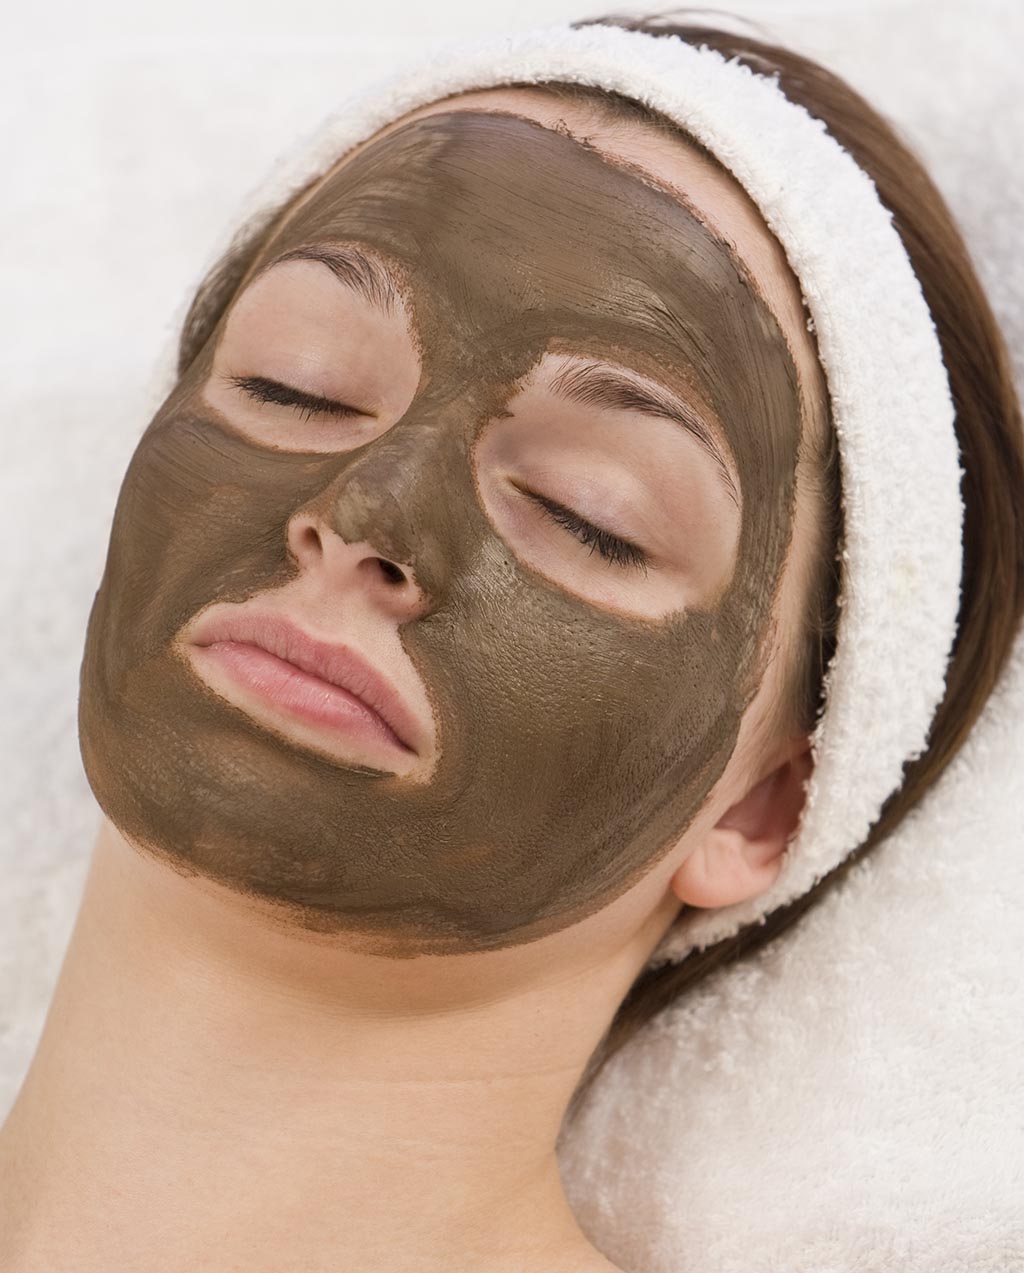 Home-made Multani Mitti Face Packs for Dry Skin